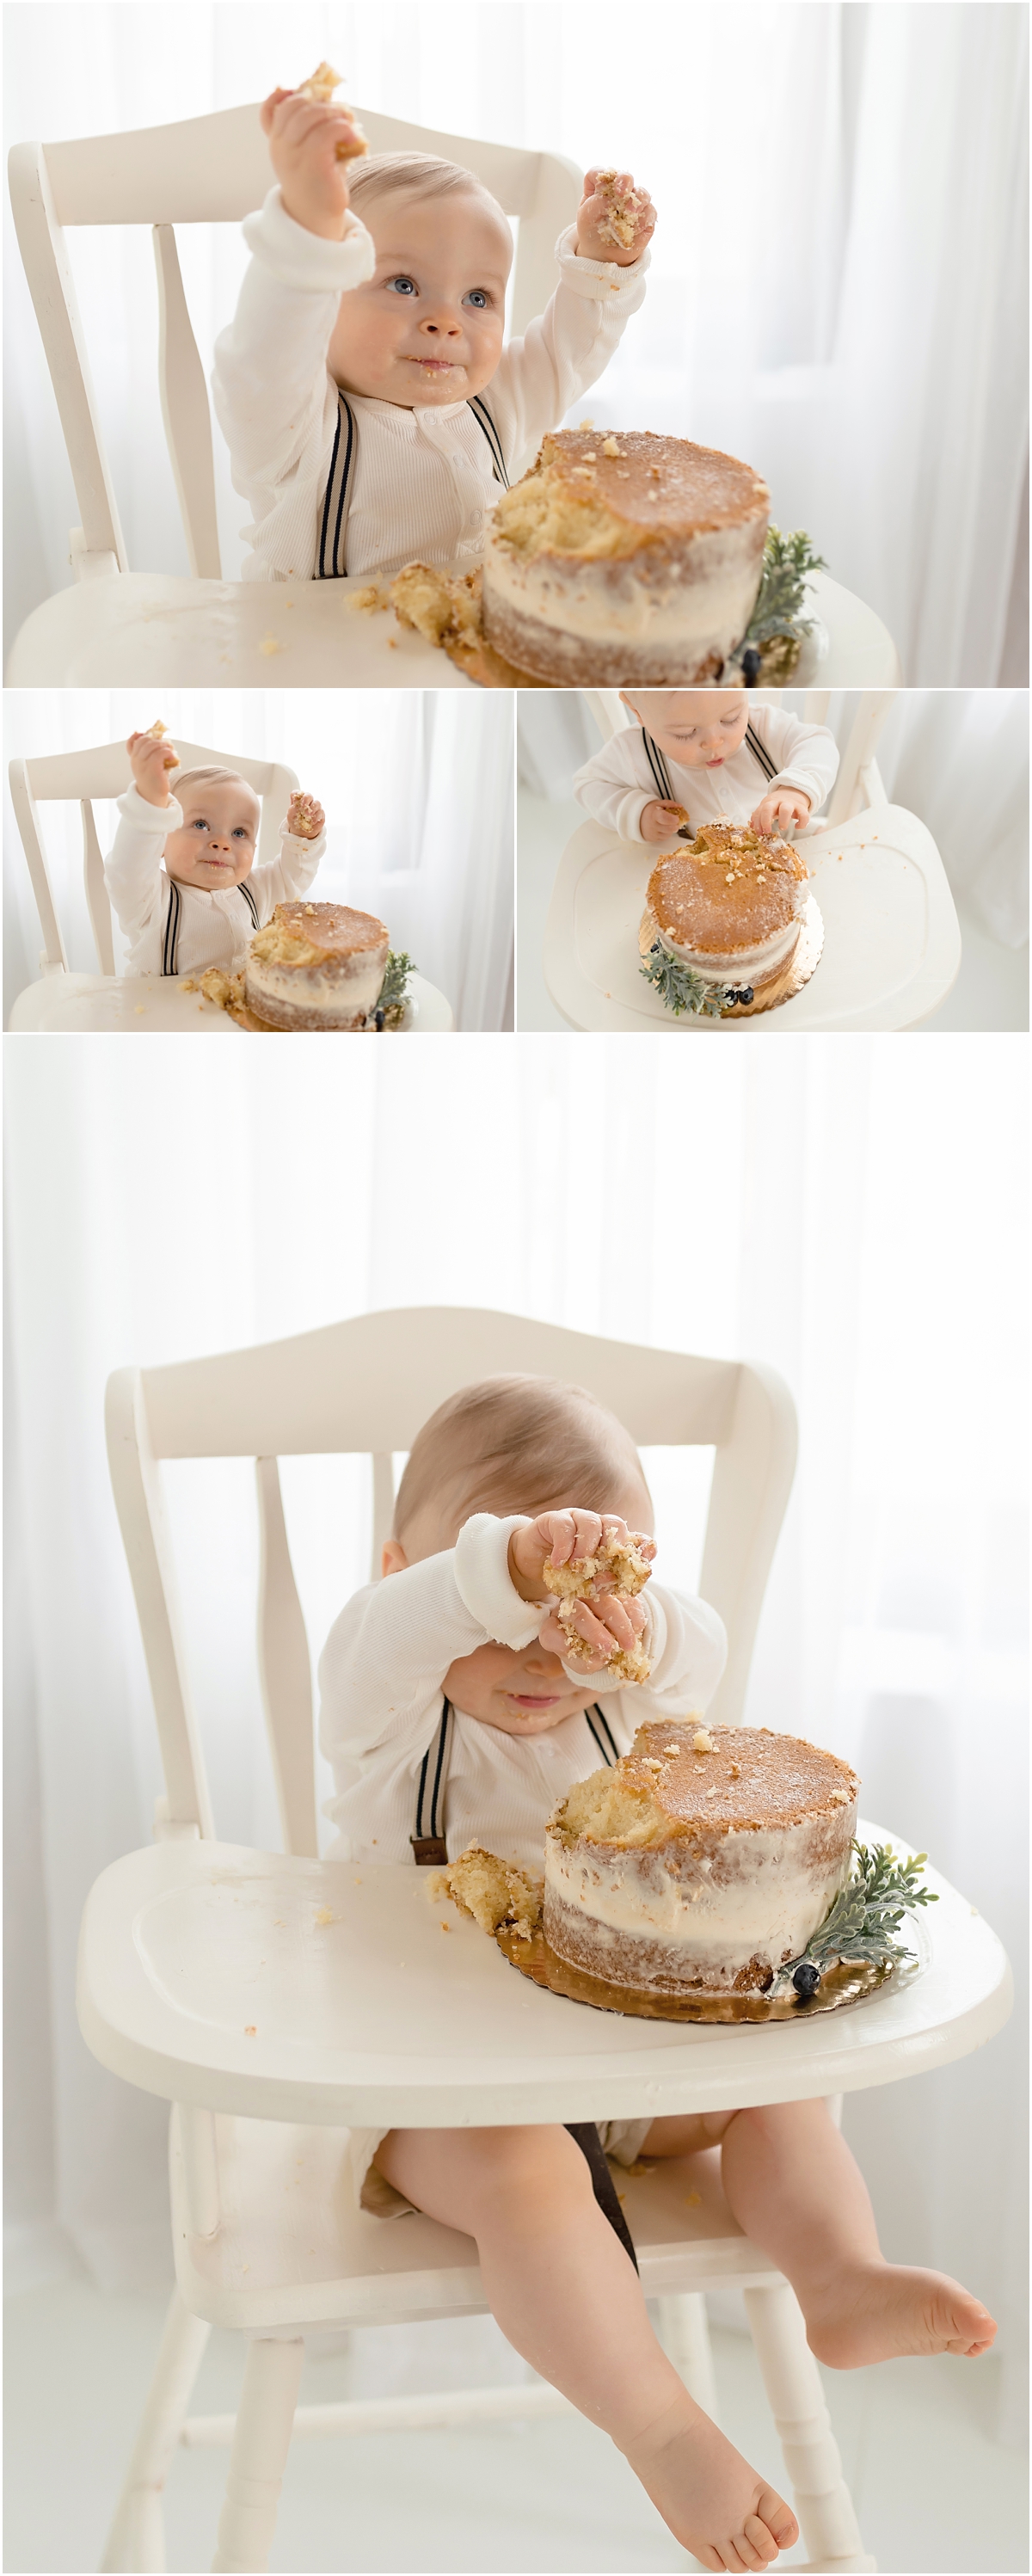 First birthday cake smash photo shoots near Hartford, CT. Kelli Dease Photography offers cake smash mini sessions in CT.